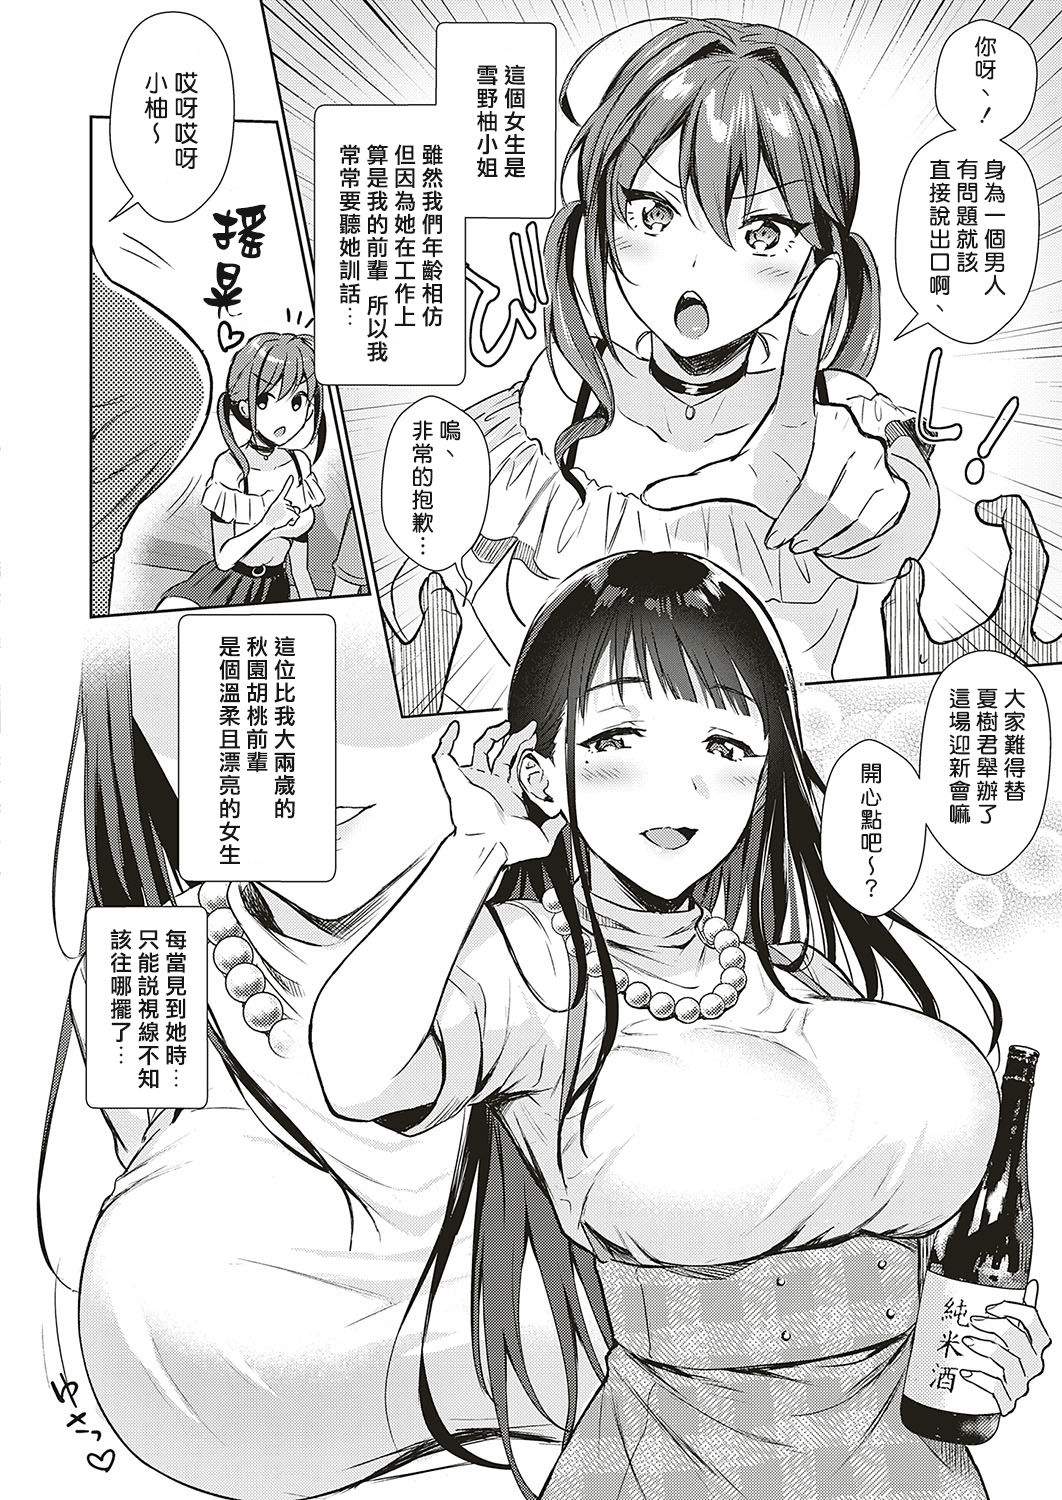 [Ame Arare] Swapping Party!? (COMIC ExE 20) [Chinese] [揮淚錦馬超漢化] [Digital] [雨あられ] スワッピングパーティー！？ (コミック エグゼ 20) [DL版] [中国翻訳]